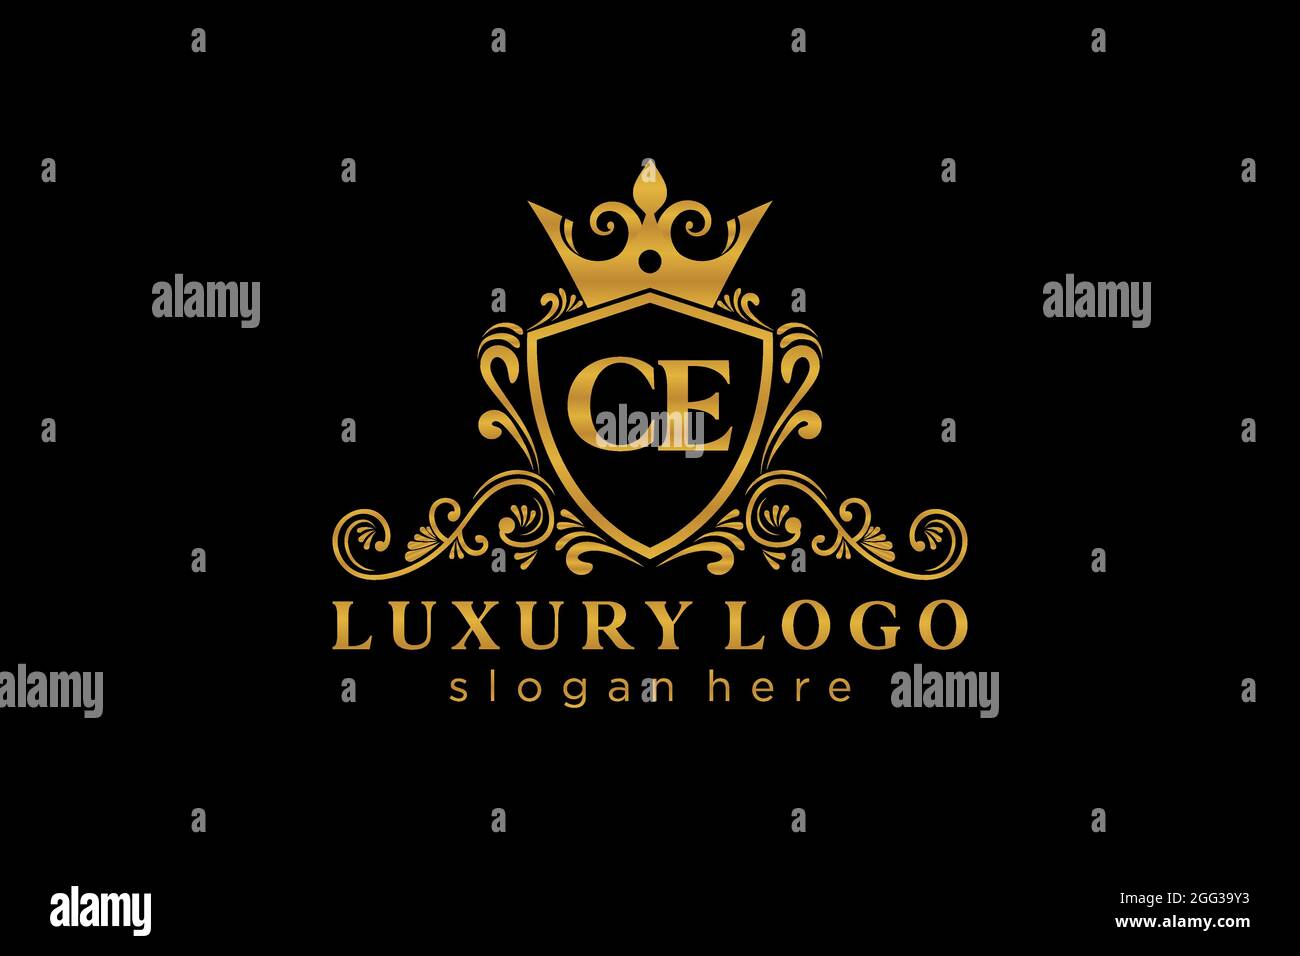 CE Letter Royal Luxury Logo template in vector art for Restaurant, Royalty, Boutique, Cafe, Hotel, Heraldic, Jewelry, Fashion and other vector illustr Stock Vector